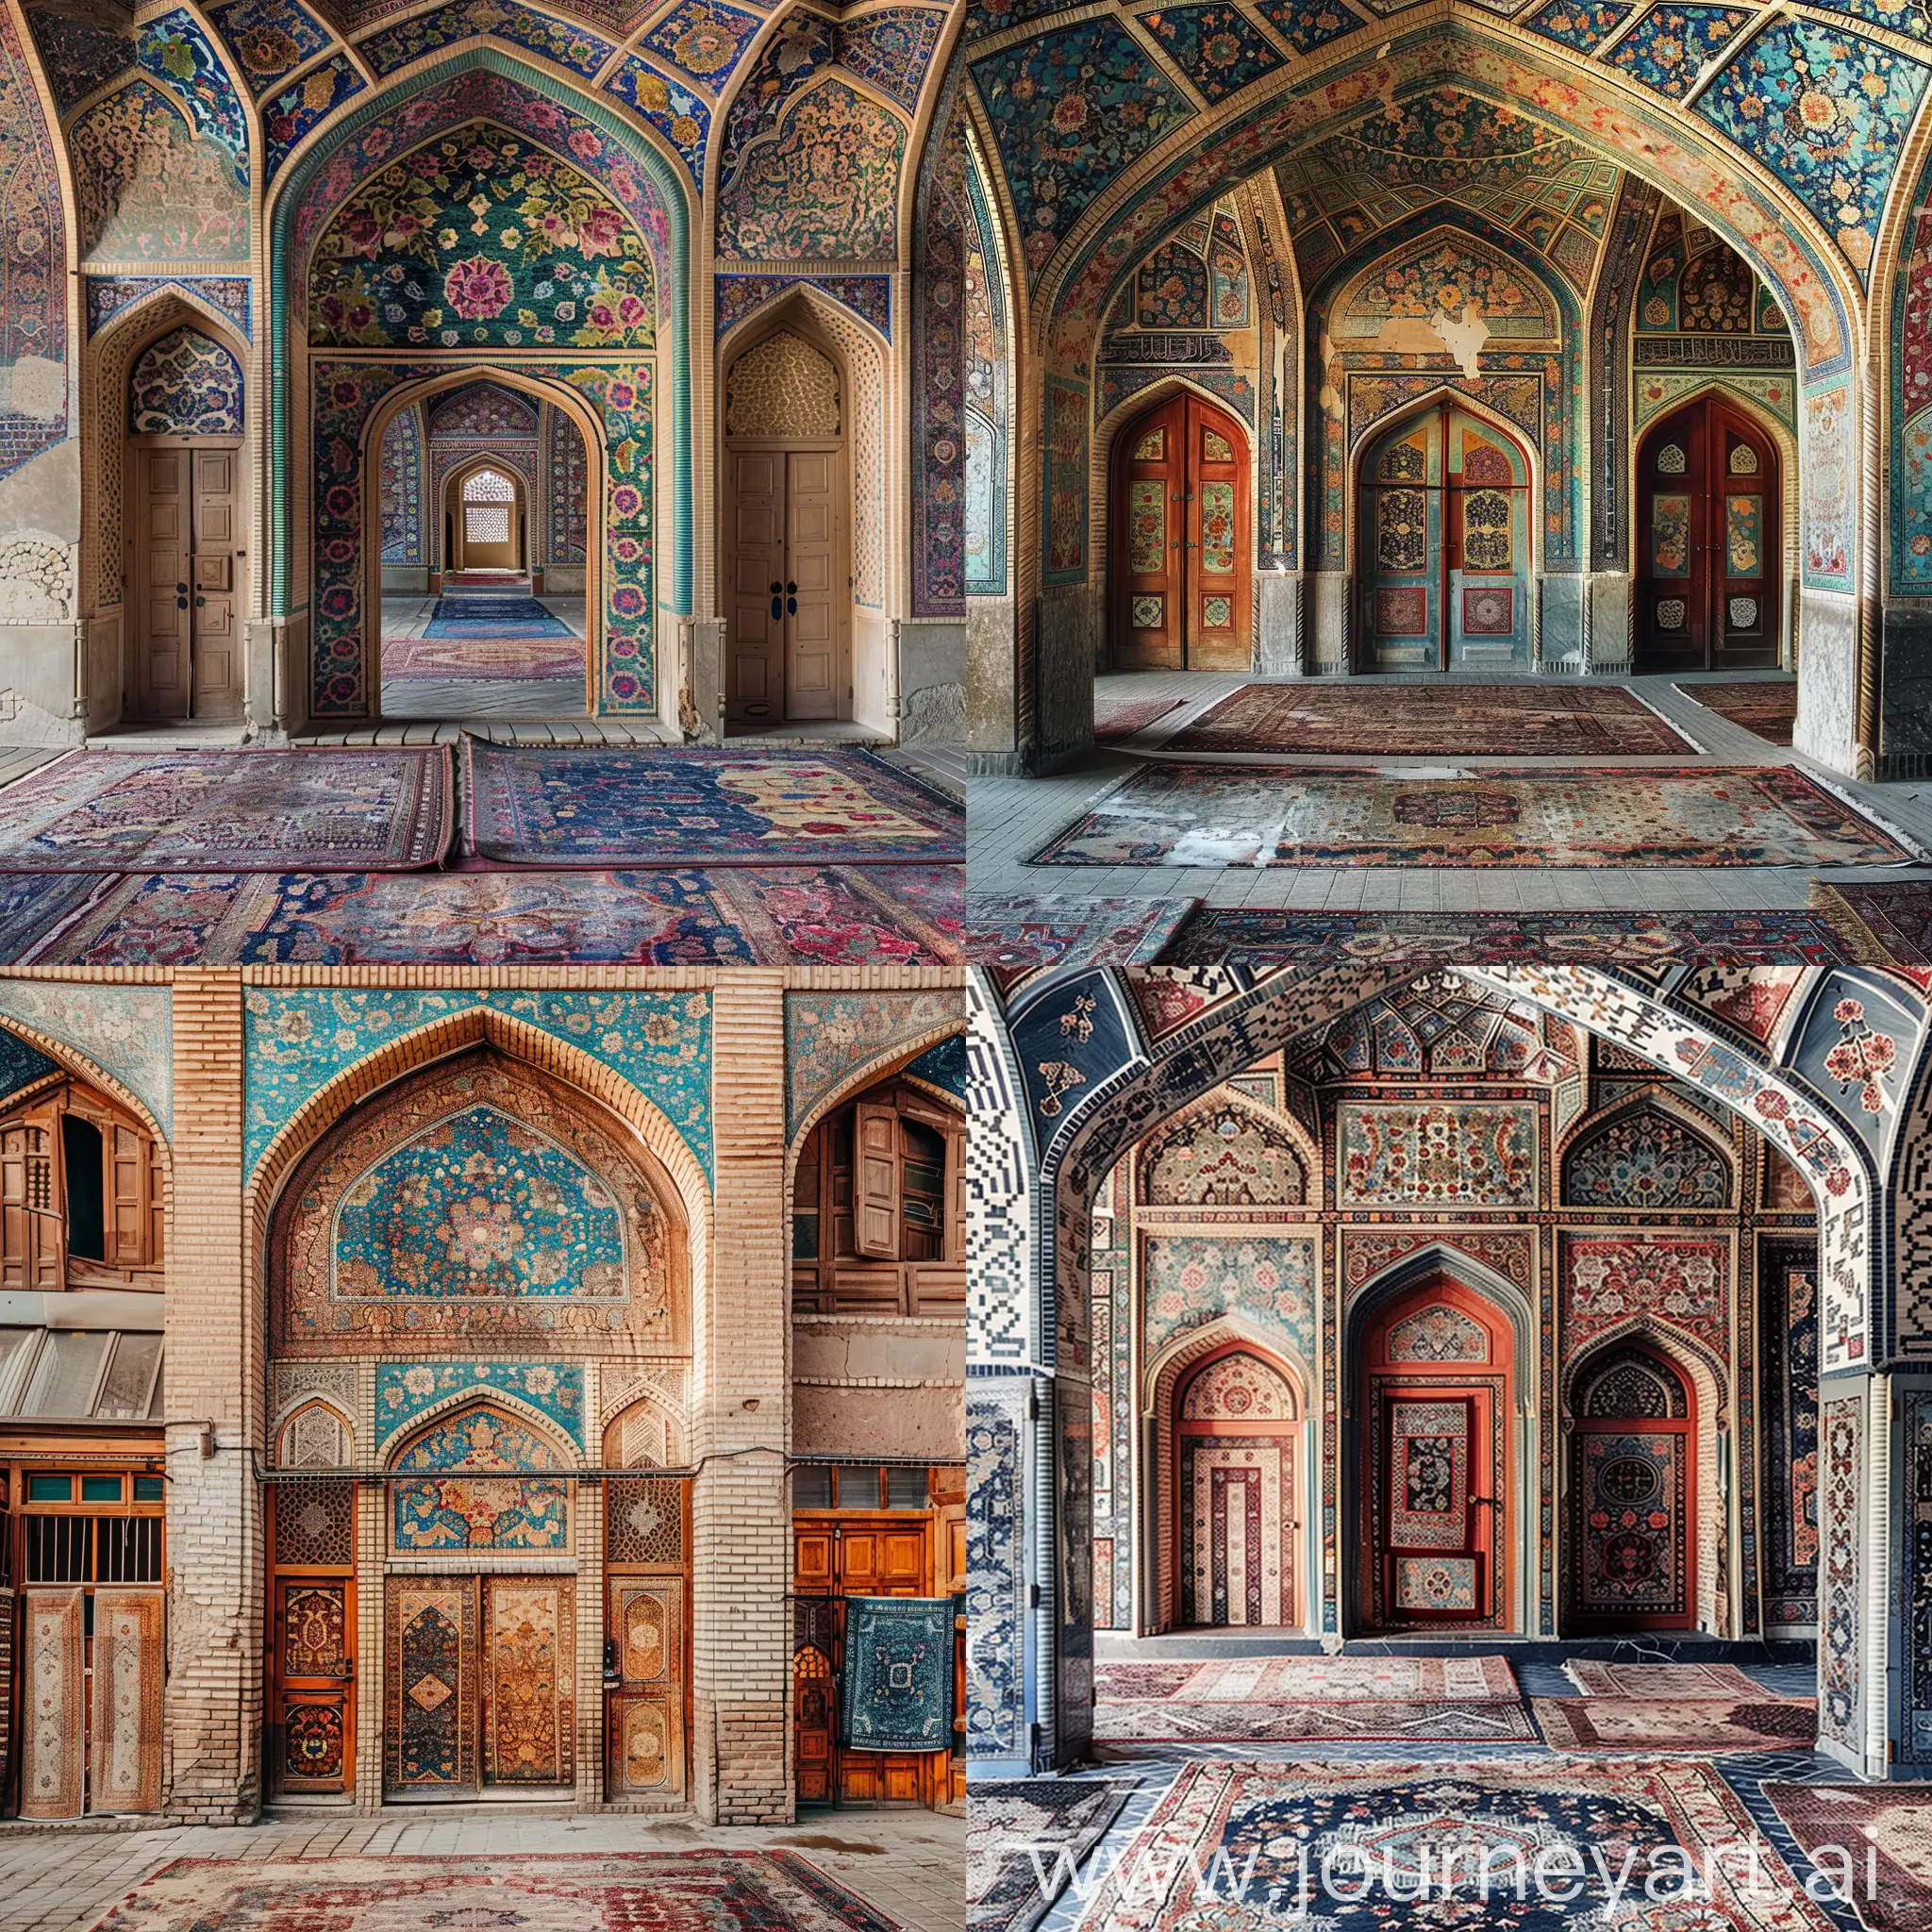 ranian architecture where all doors, walls and floors are covered with Iranian carpets